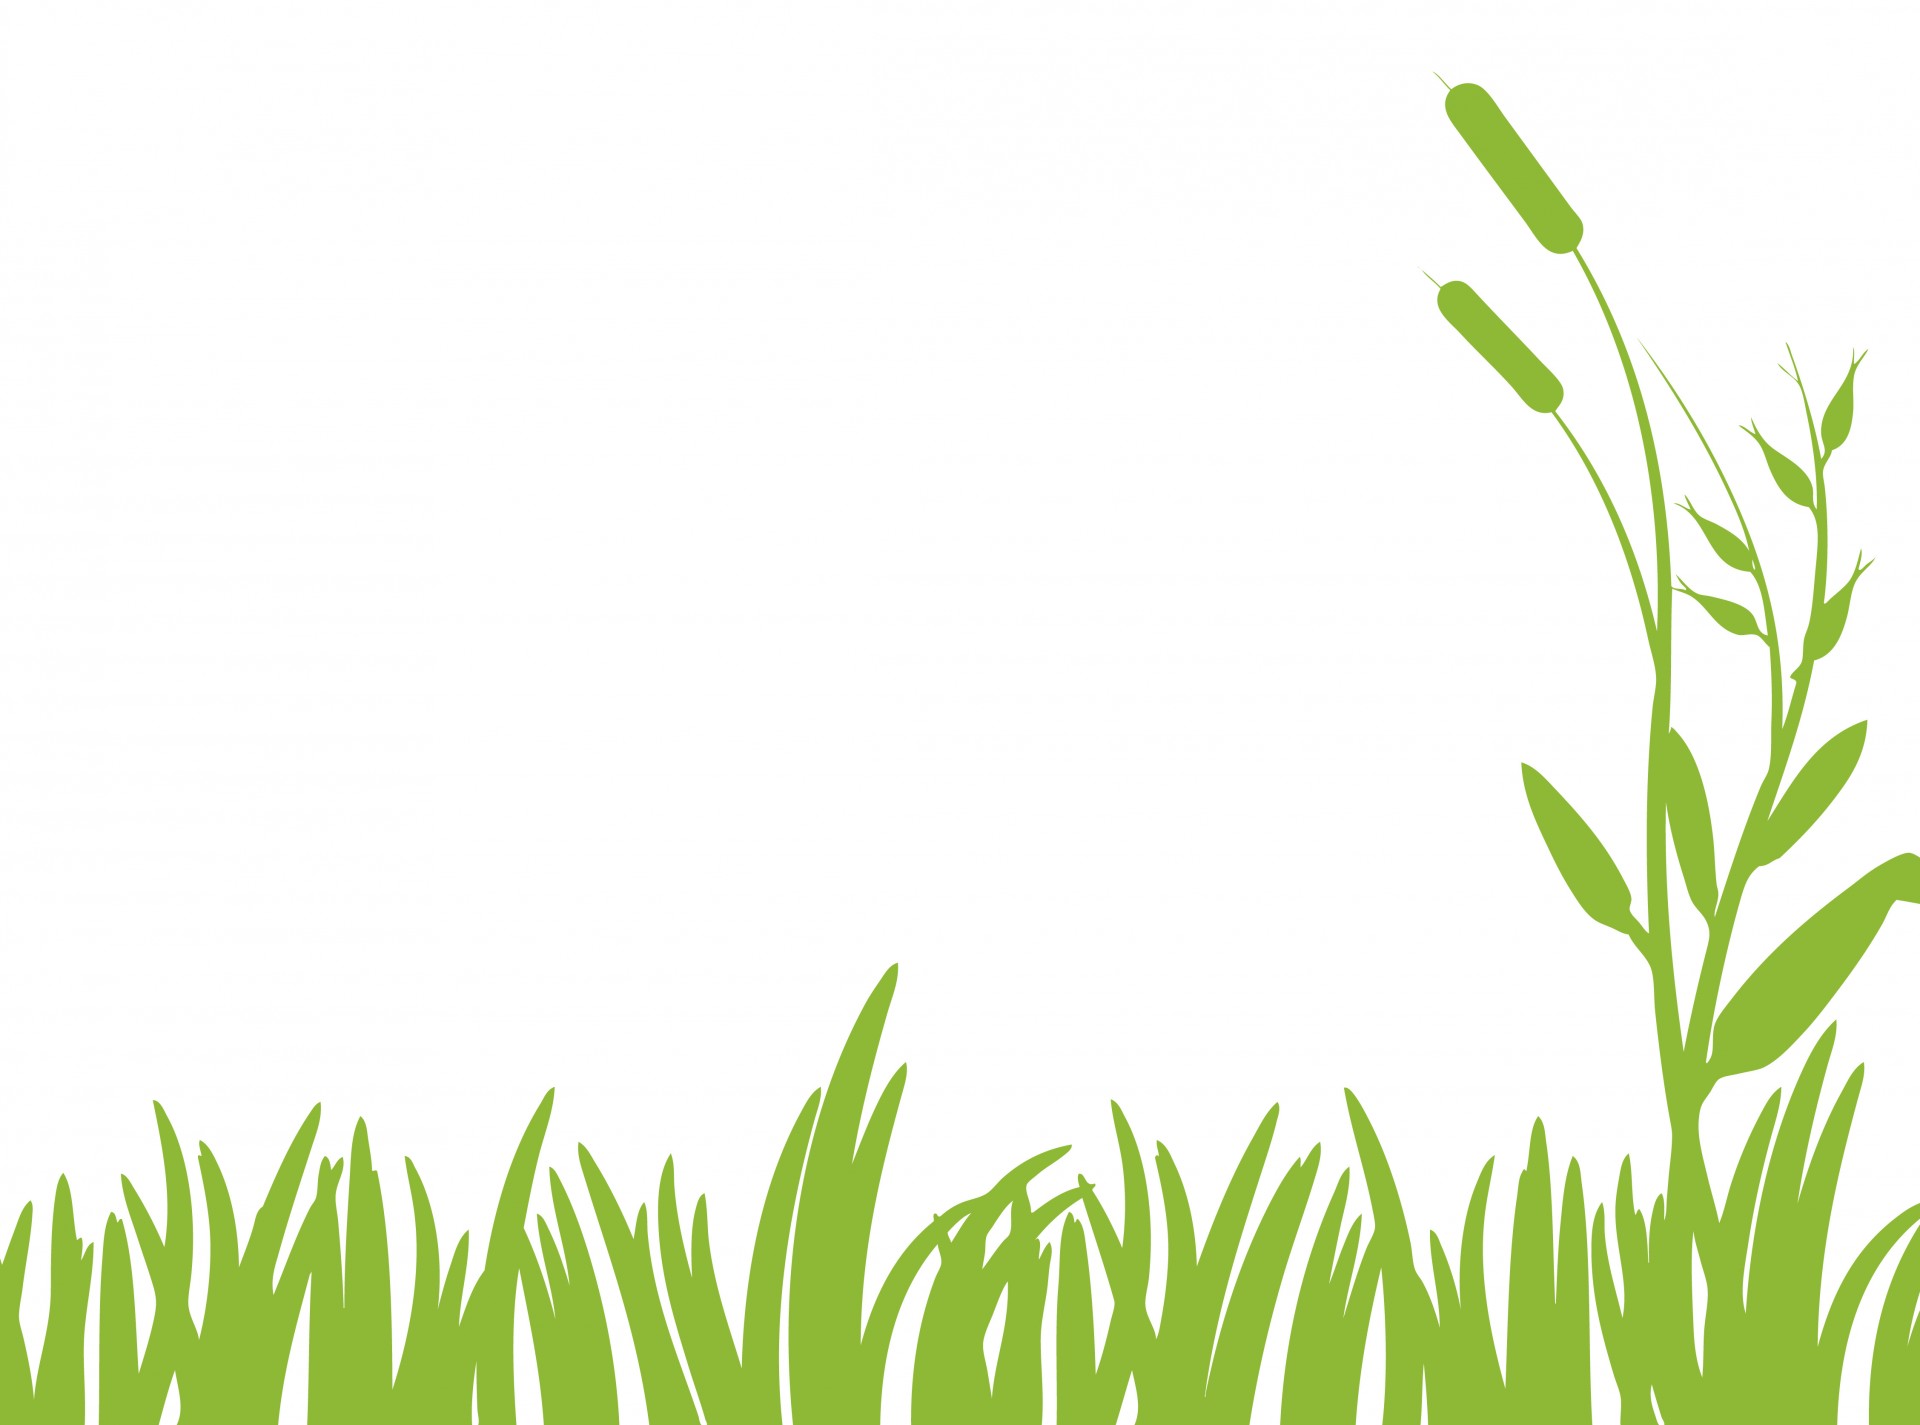 Download free photo of Grass,green,nature,clipart,art from needpix.com